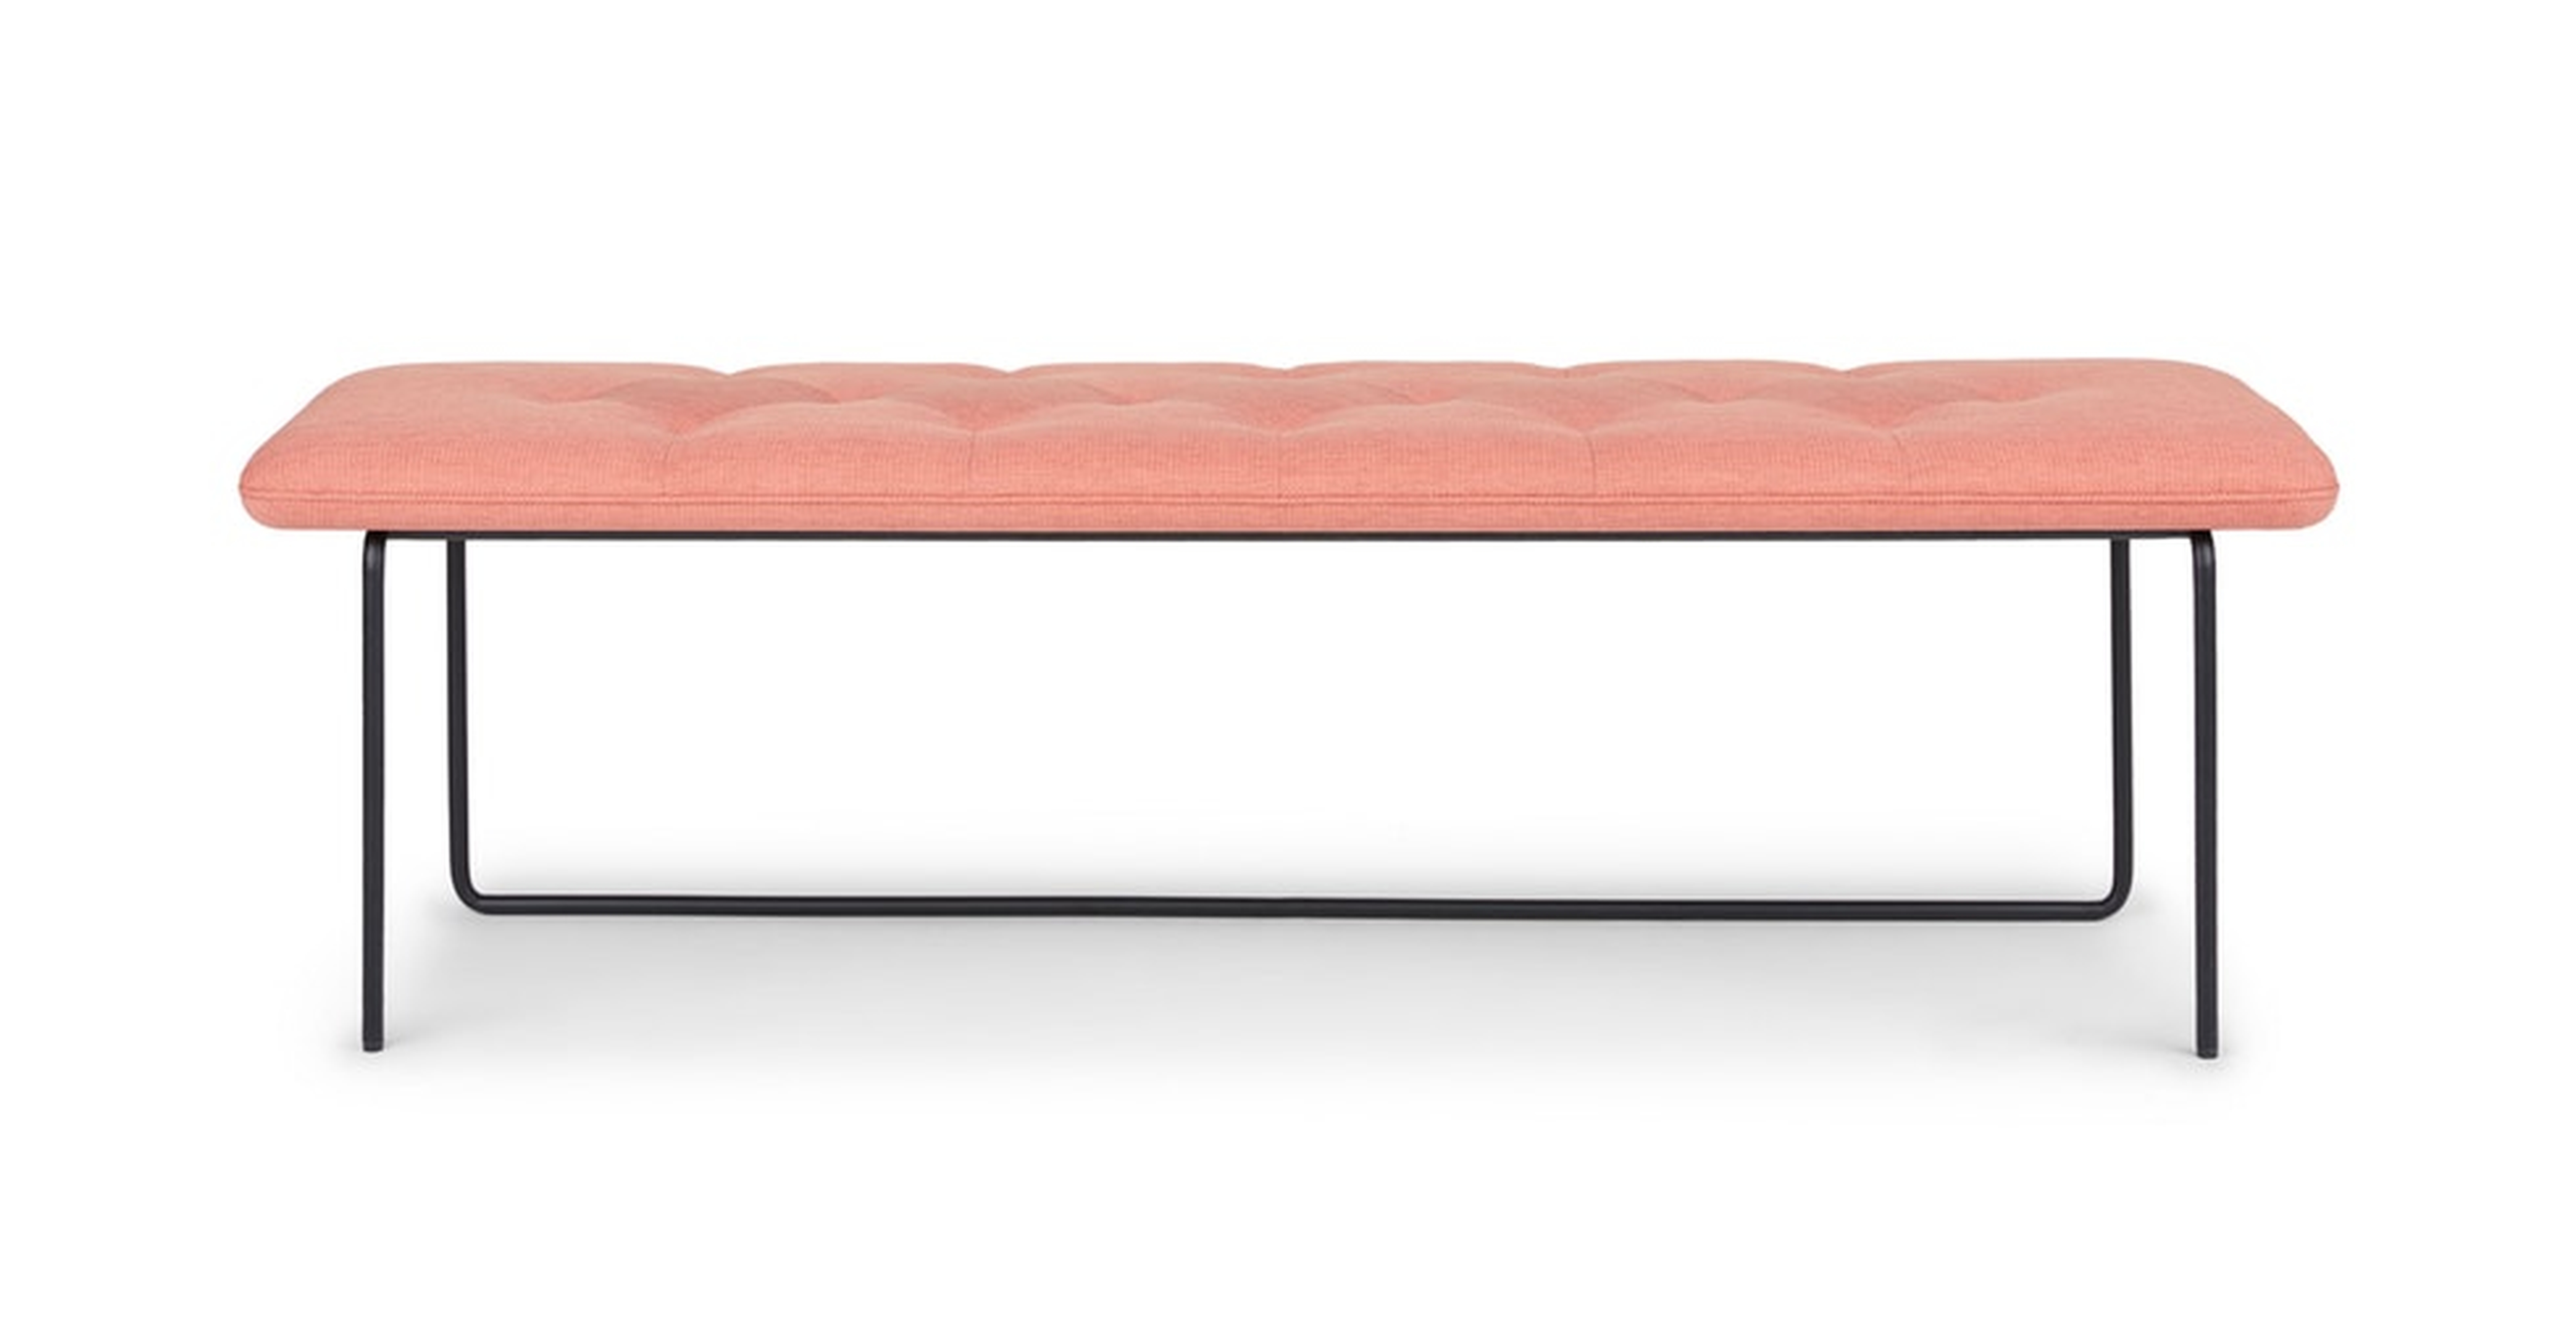 Level Soft Coral Bench - Article